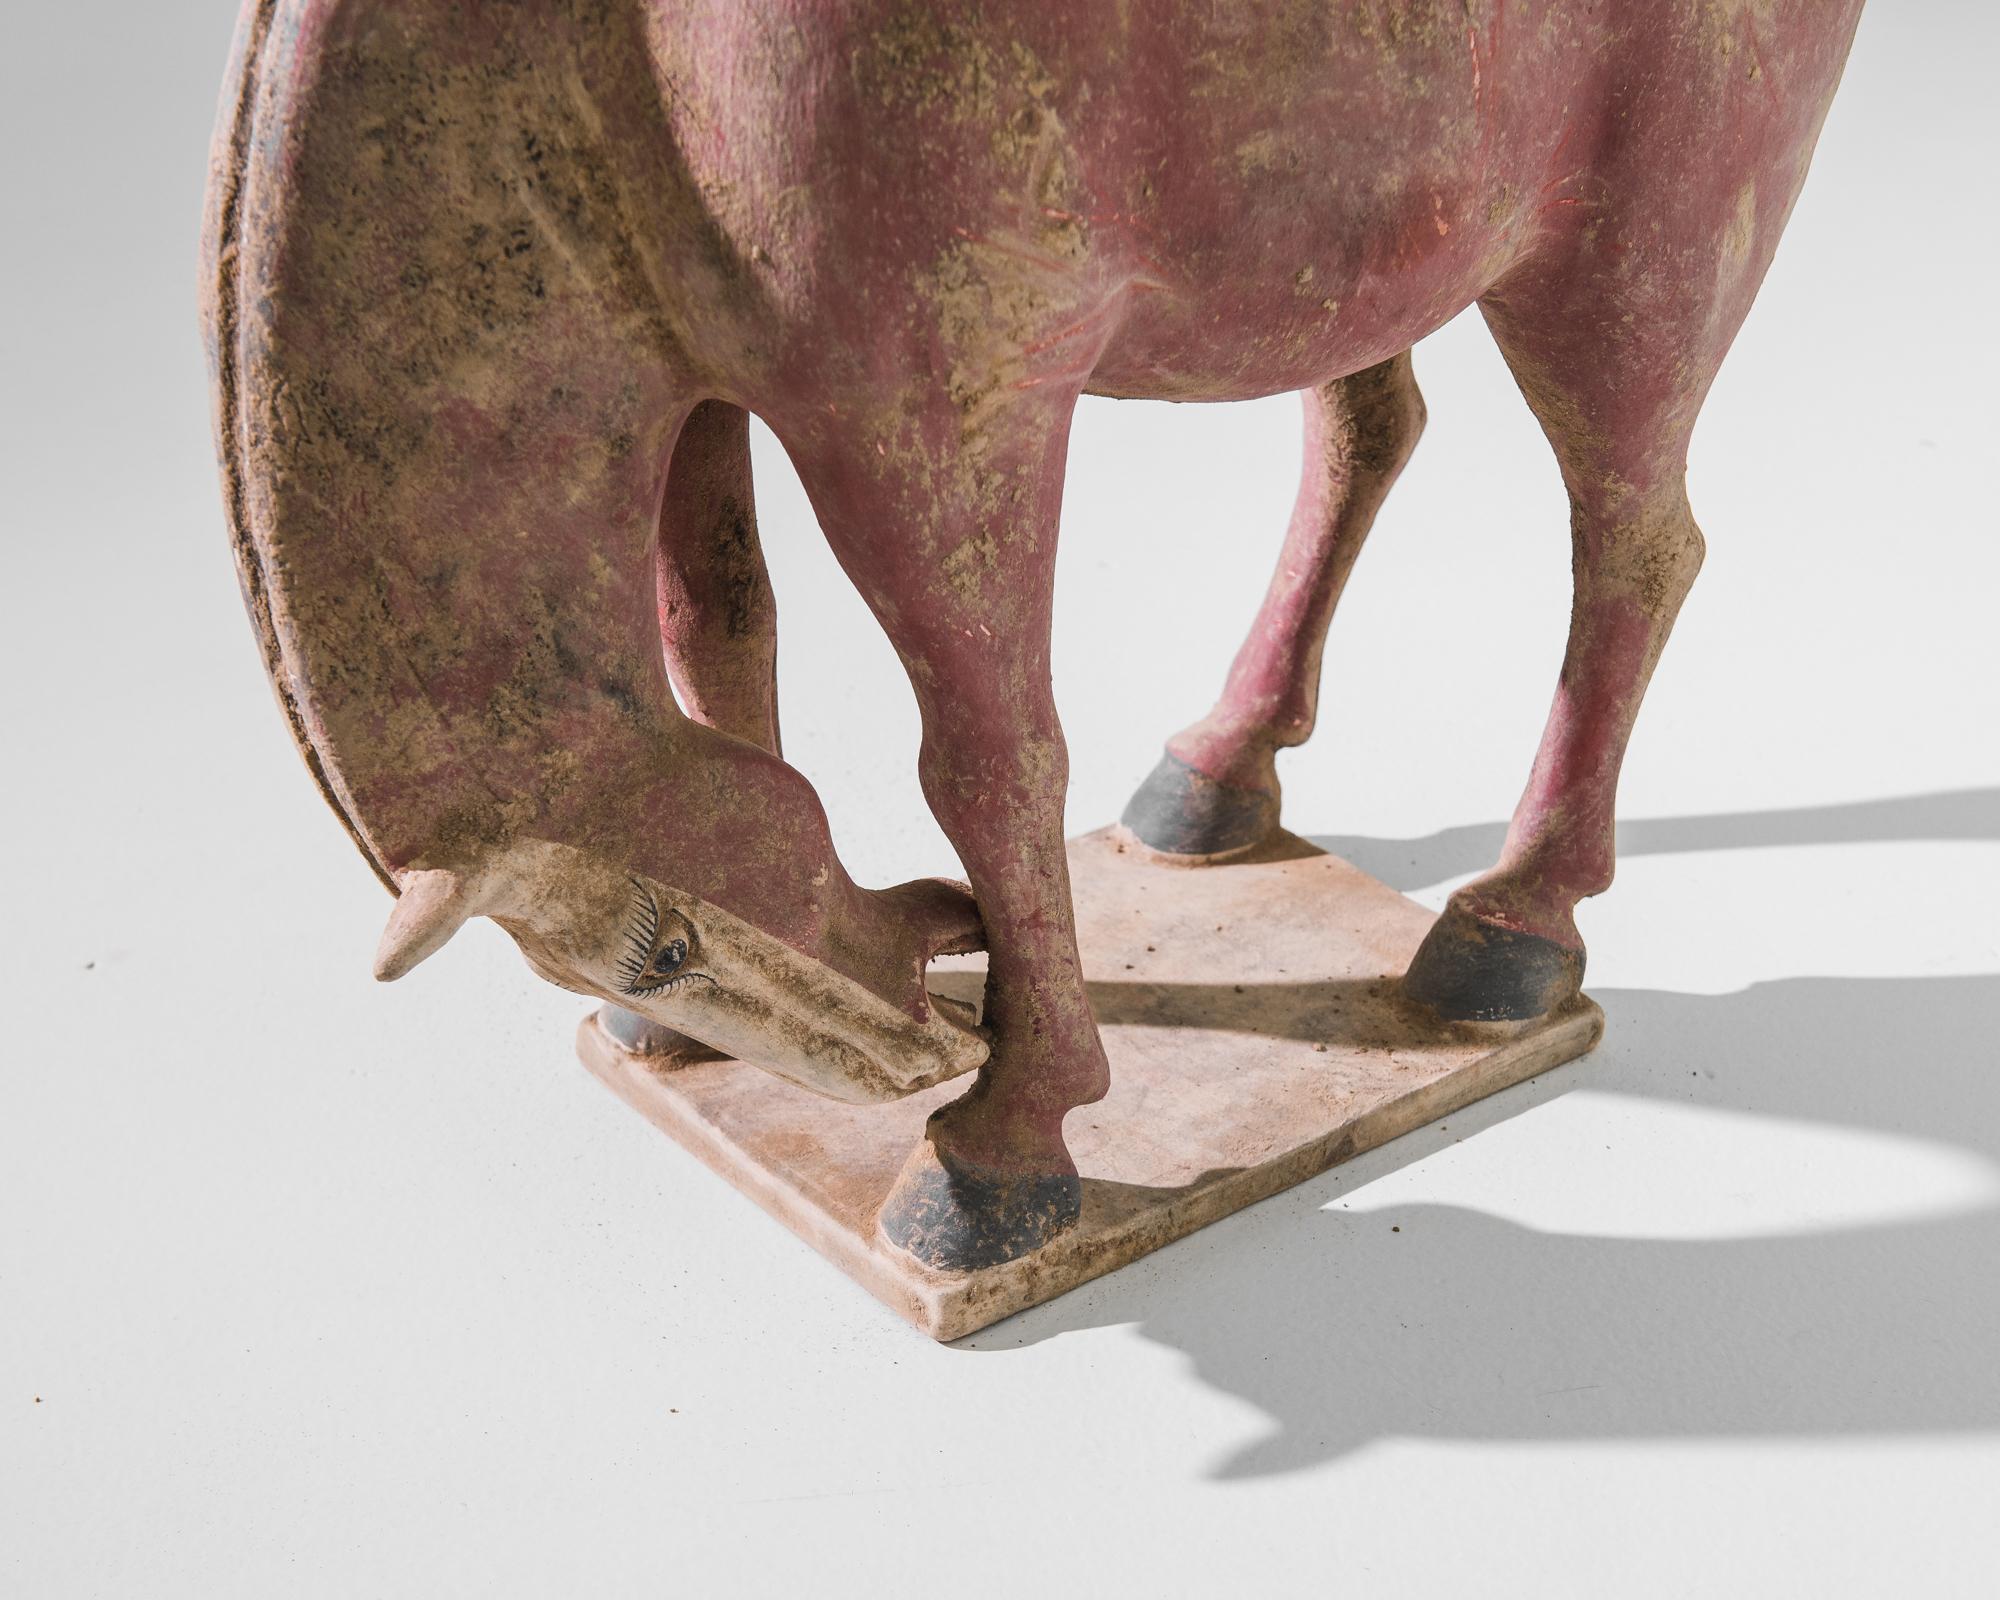 A warm, natural color palette — terra-cotta red and sun-baked sand — and a textural finish give this jubilant horse a wholesome appeal. The silhouette is simple and harmonious; the graceful arch of the neck is counterbalanced by the spirited